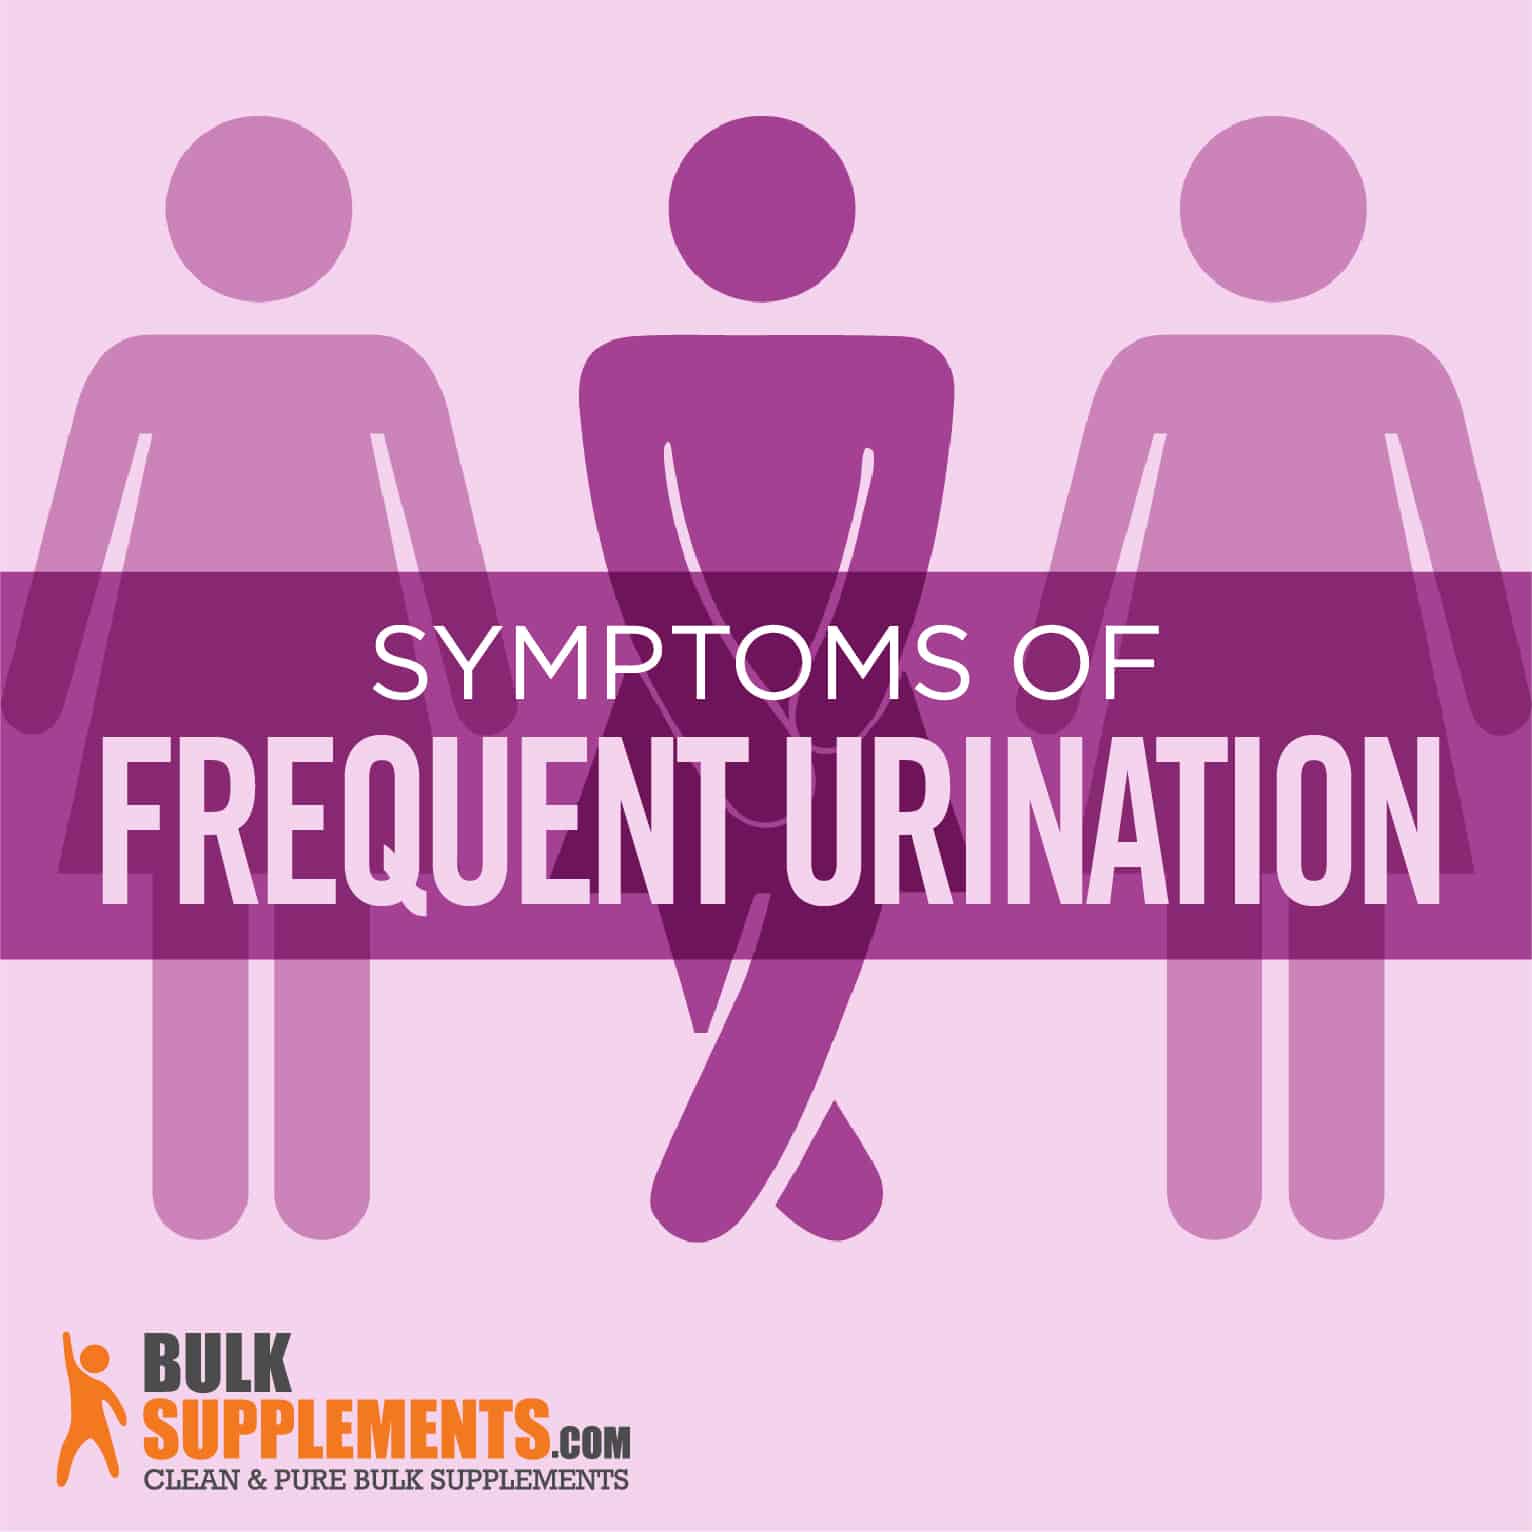 Frequent Urination